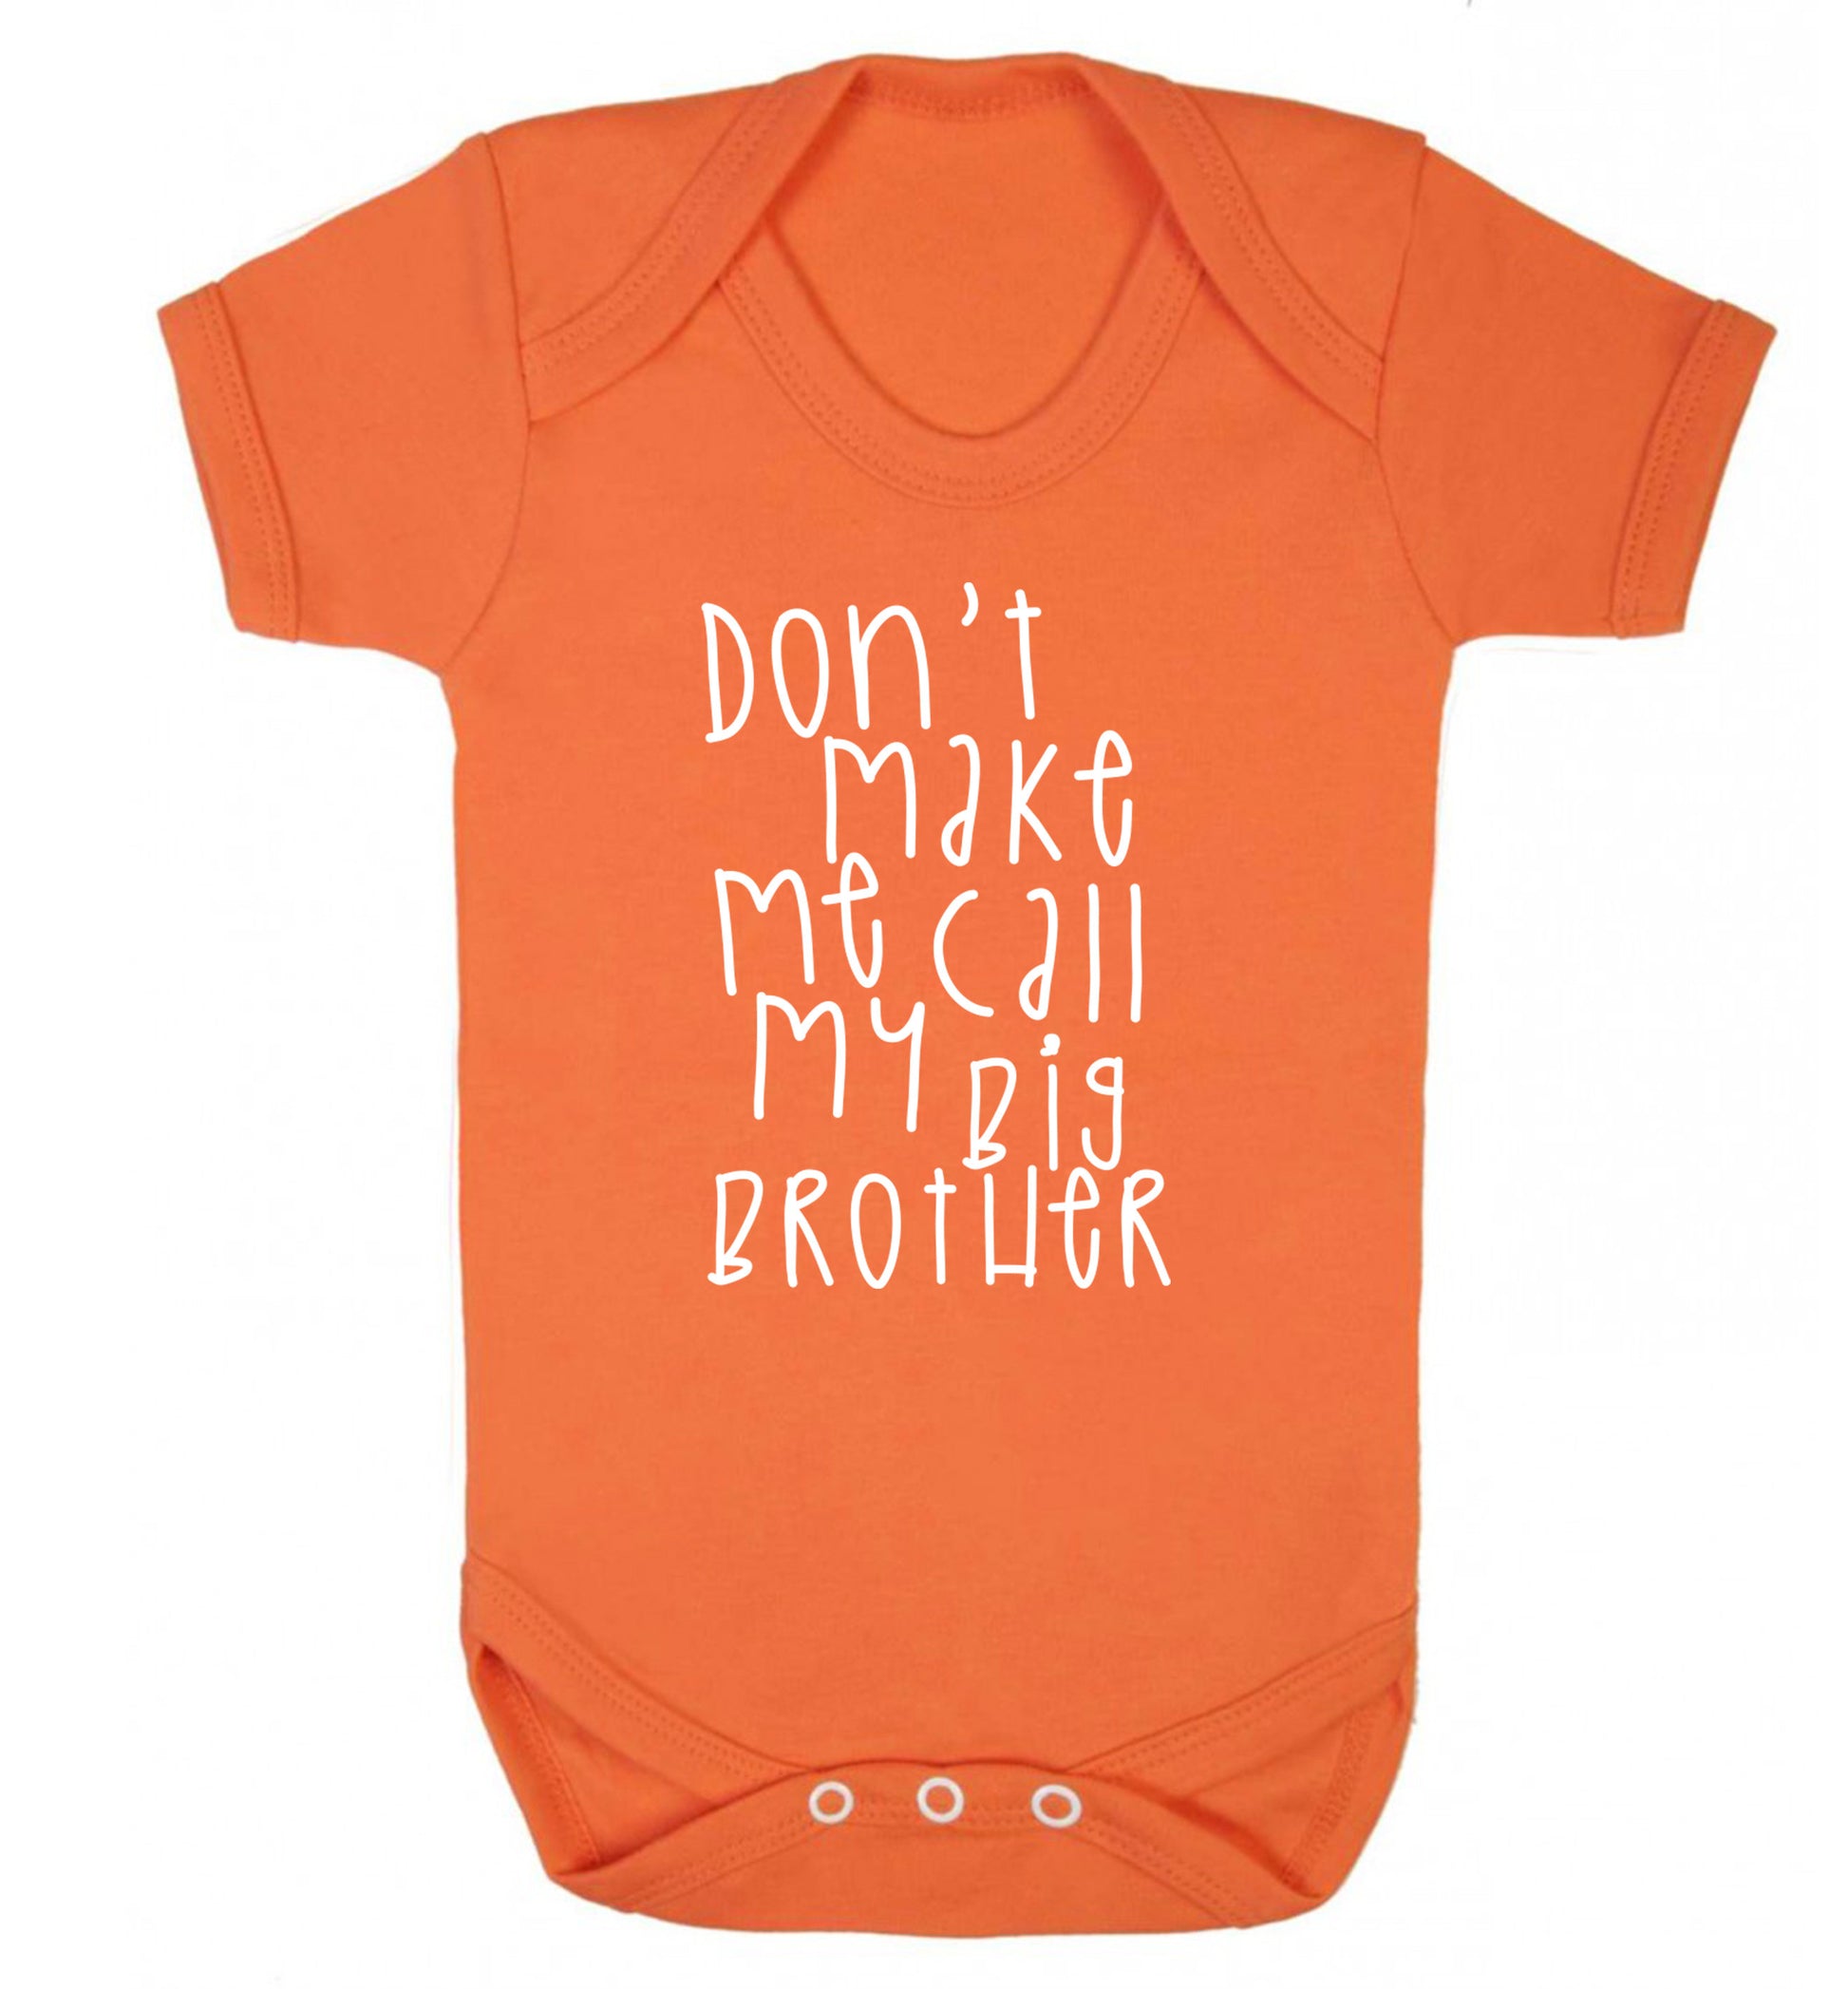 Don't make me call my big brother Baby Vest orange 18-24 months